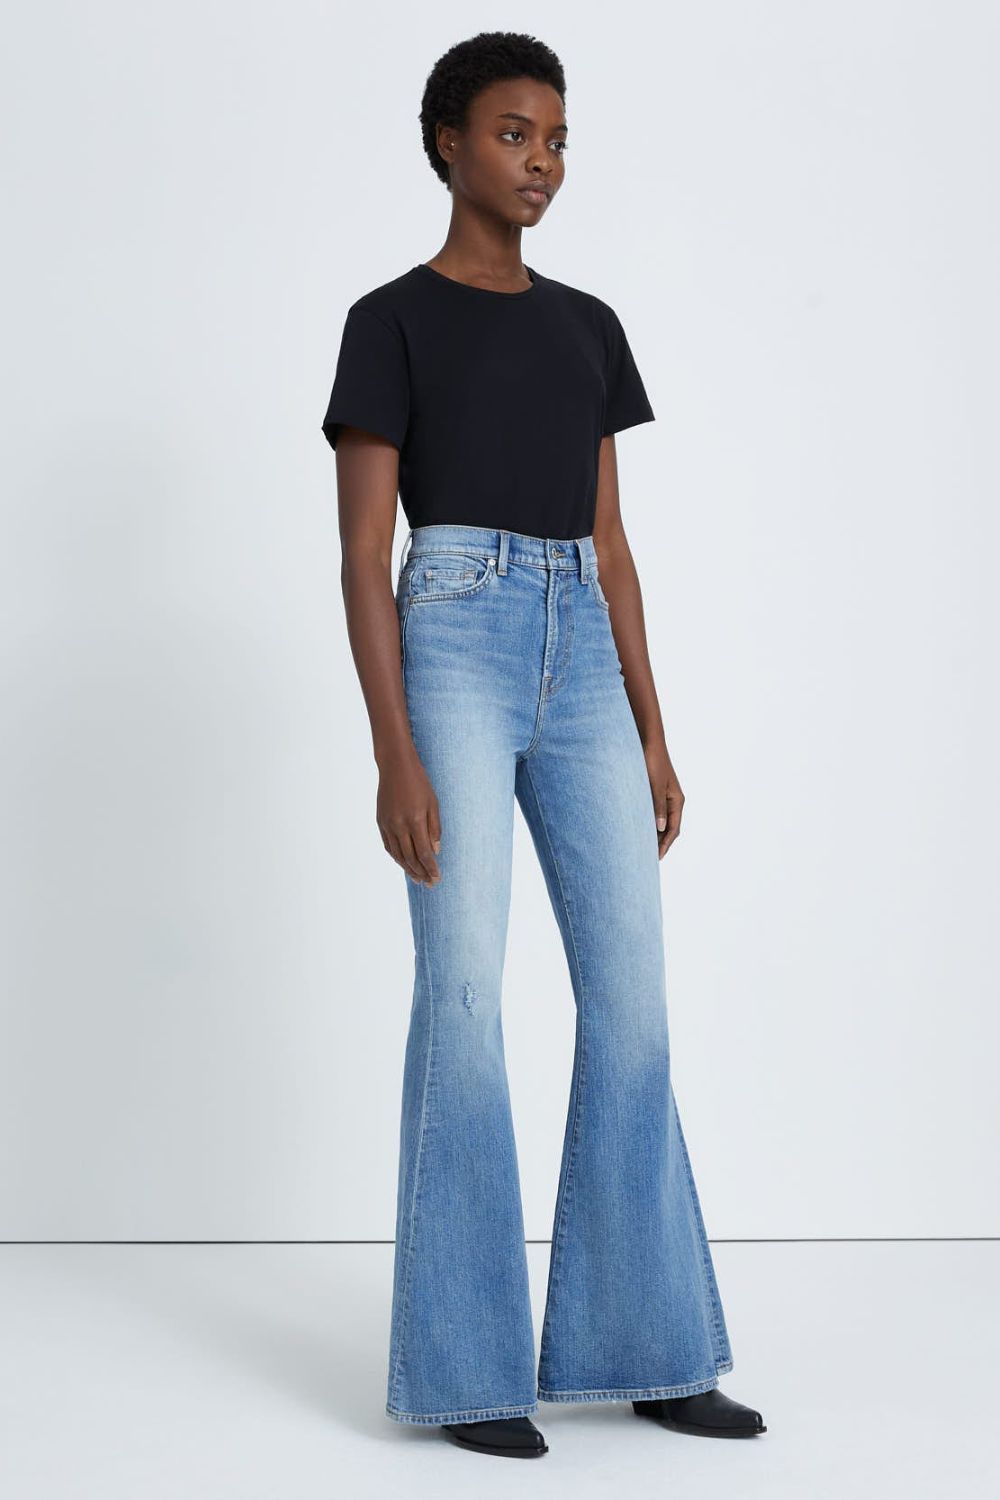 Usher In Spring With These Fresh New Denim Styles - The Gloss Magazine